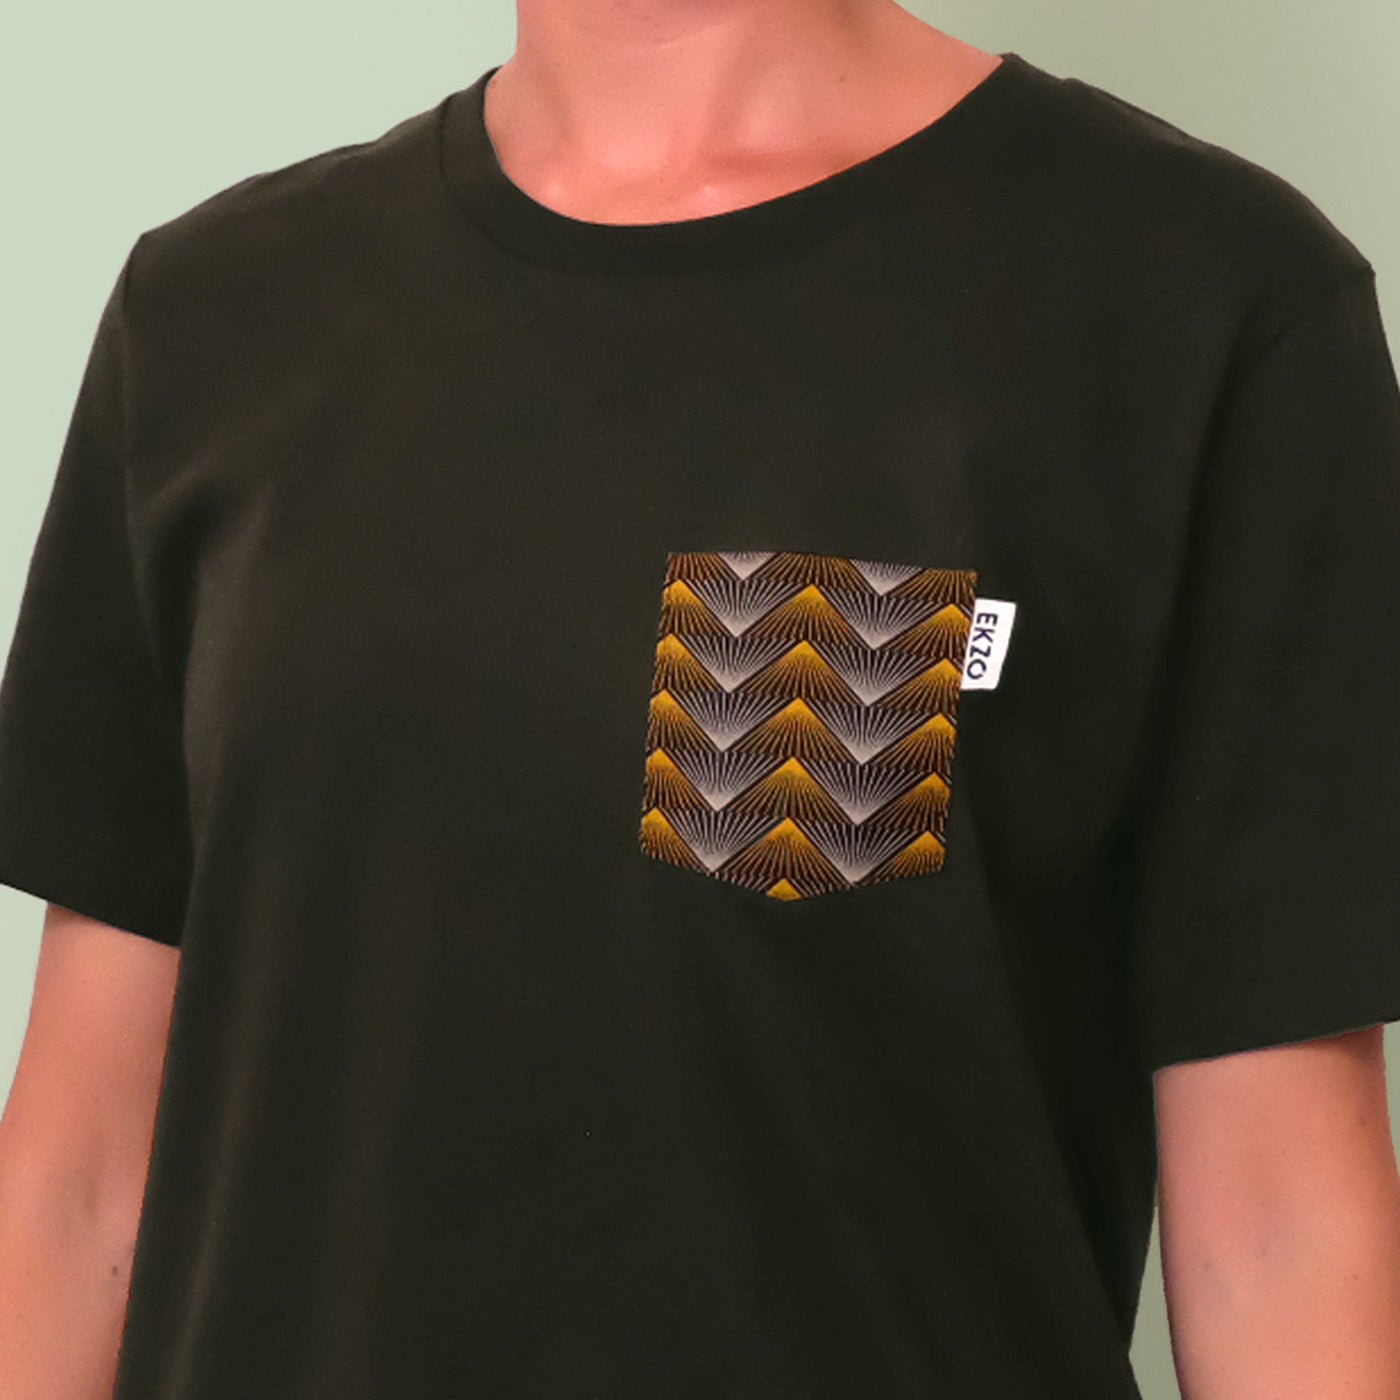 Close up of gold and gray patterned chest pocket on a dark green shirt